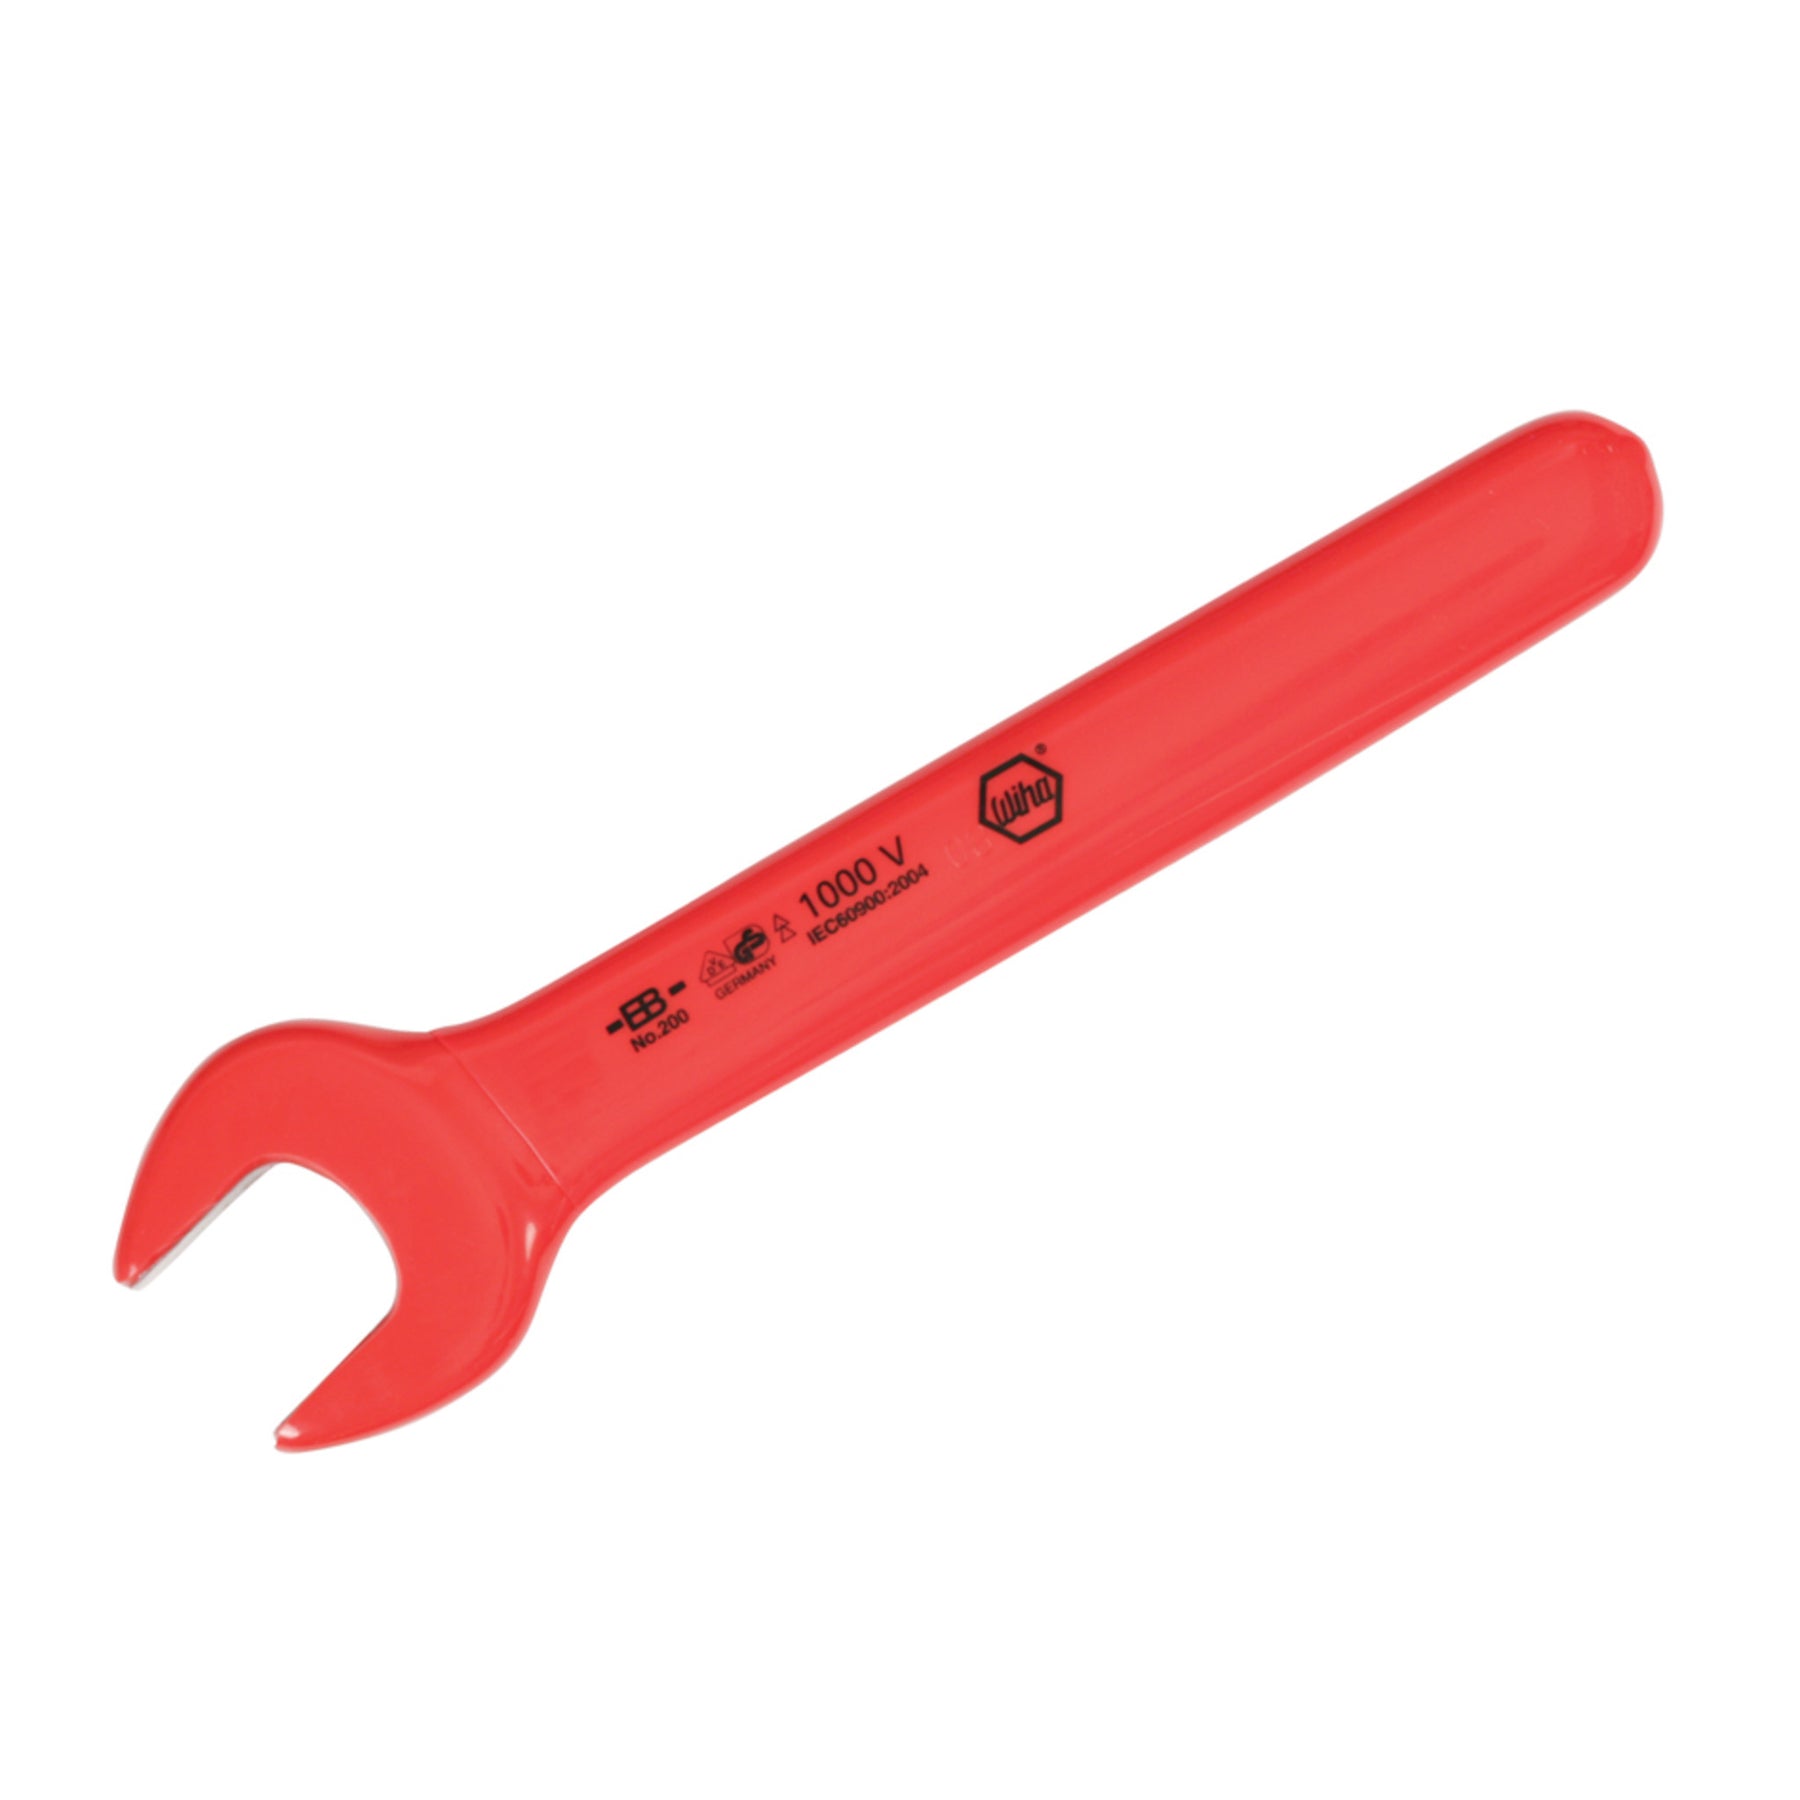 Wiha 20008 Insulated Open End Wrench 8.0mm